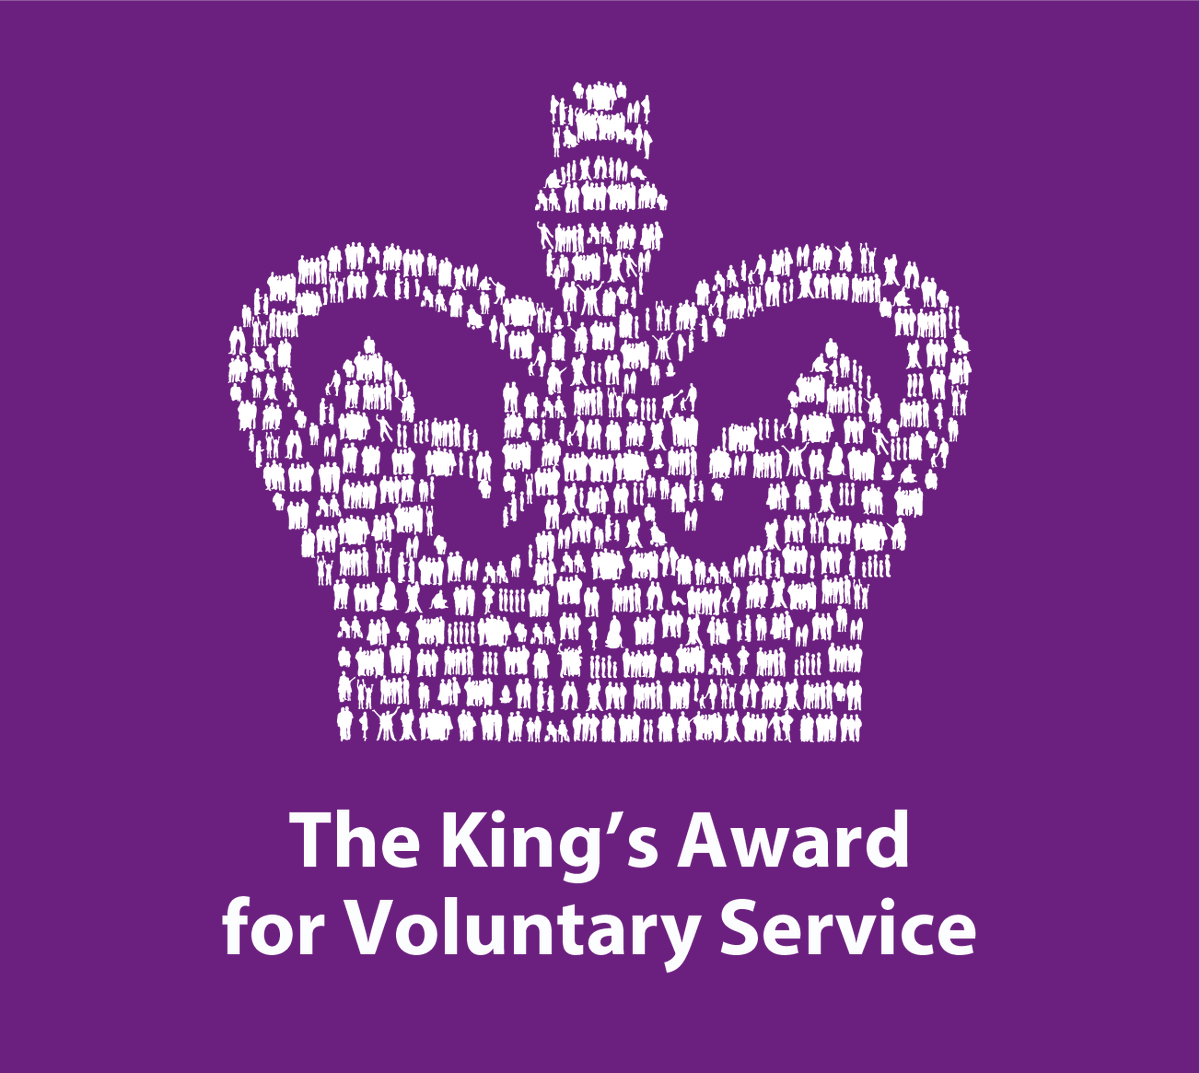 Huge congratulations to Warwickshire Search & Rescue, @WolvesSams, Wolverhamption Alz Café, South Shropshire Engineering Ambassadors & @WhitefriarsSg for their well-deserved Kings Award for Volunteers!👏👏 Their incredible work embodies the spirit of #DoingGoodTogether